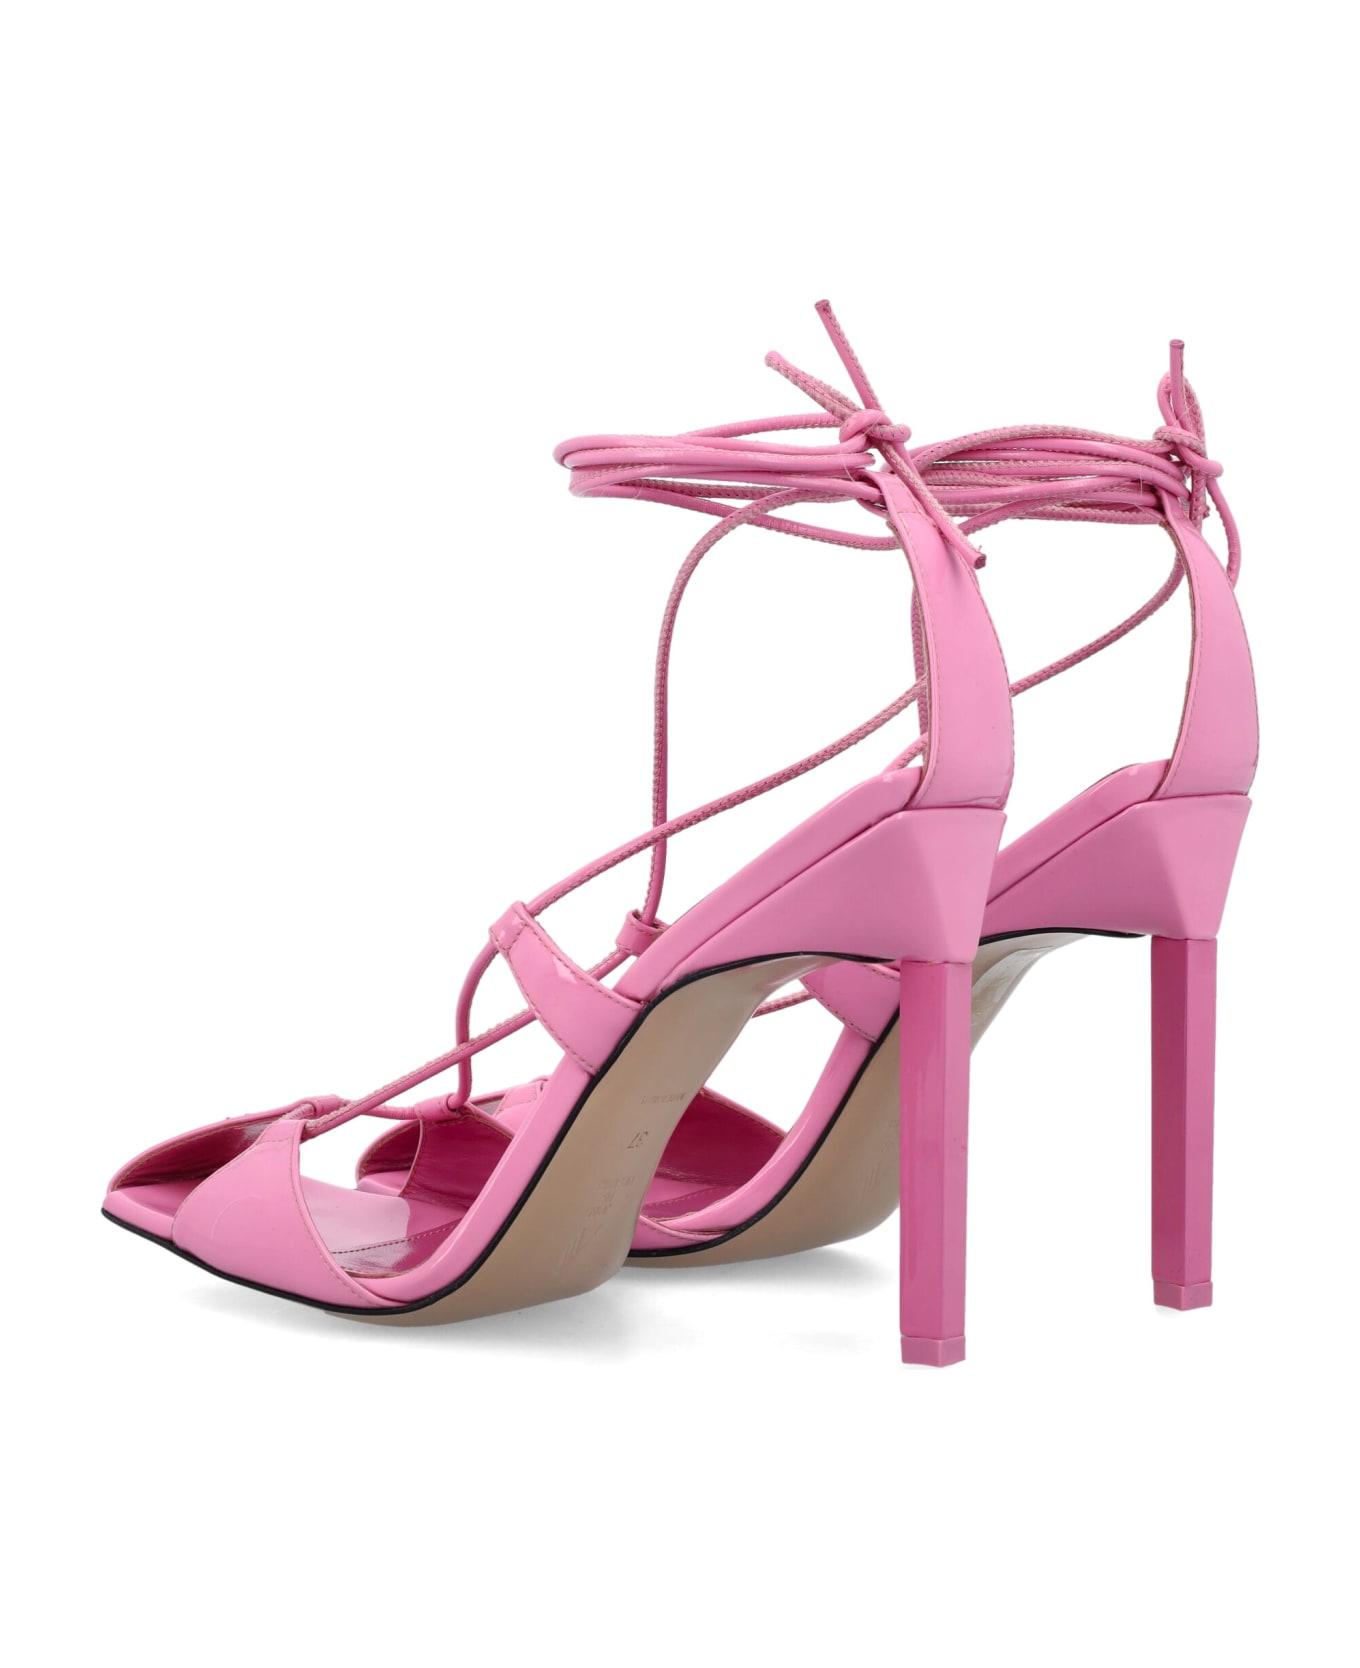 The Attico Adele Lace-up Sandal 105 - Light pink